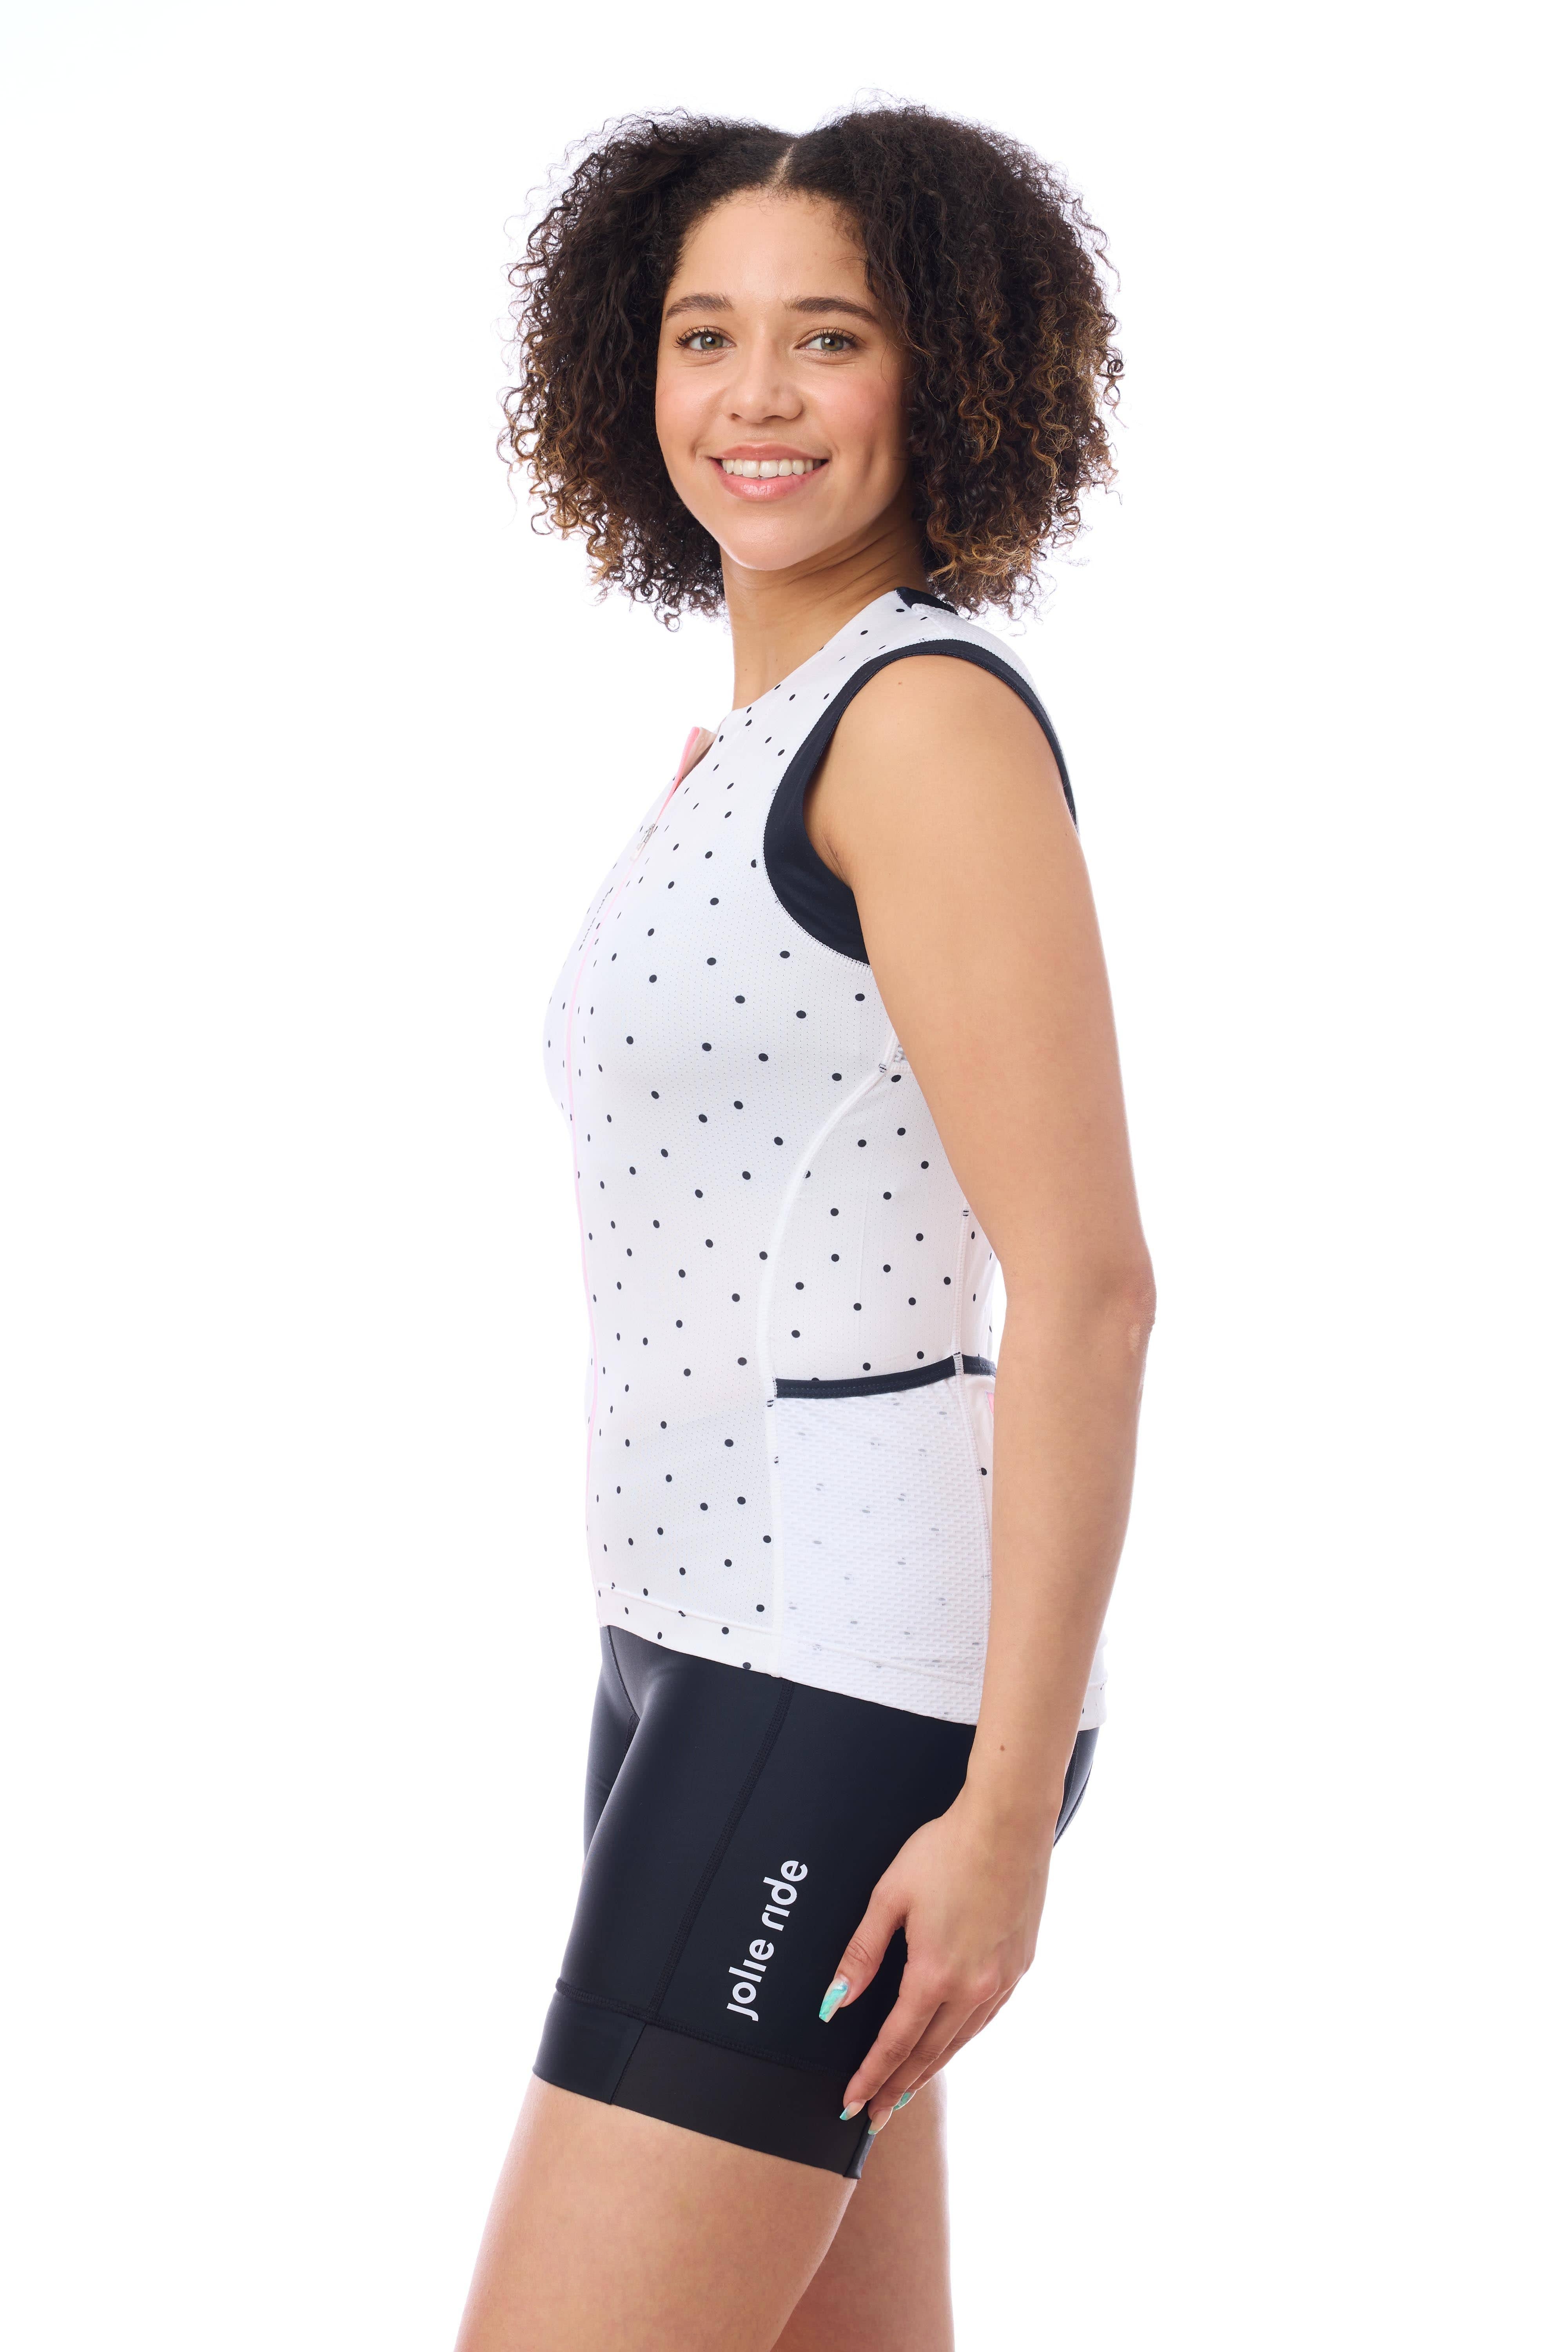 JolieRide Tank top sleeveless cycling jersey with solar protection and quick dry fabric